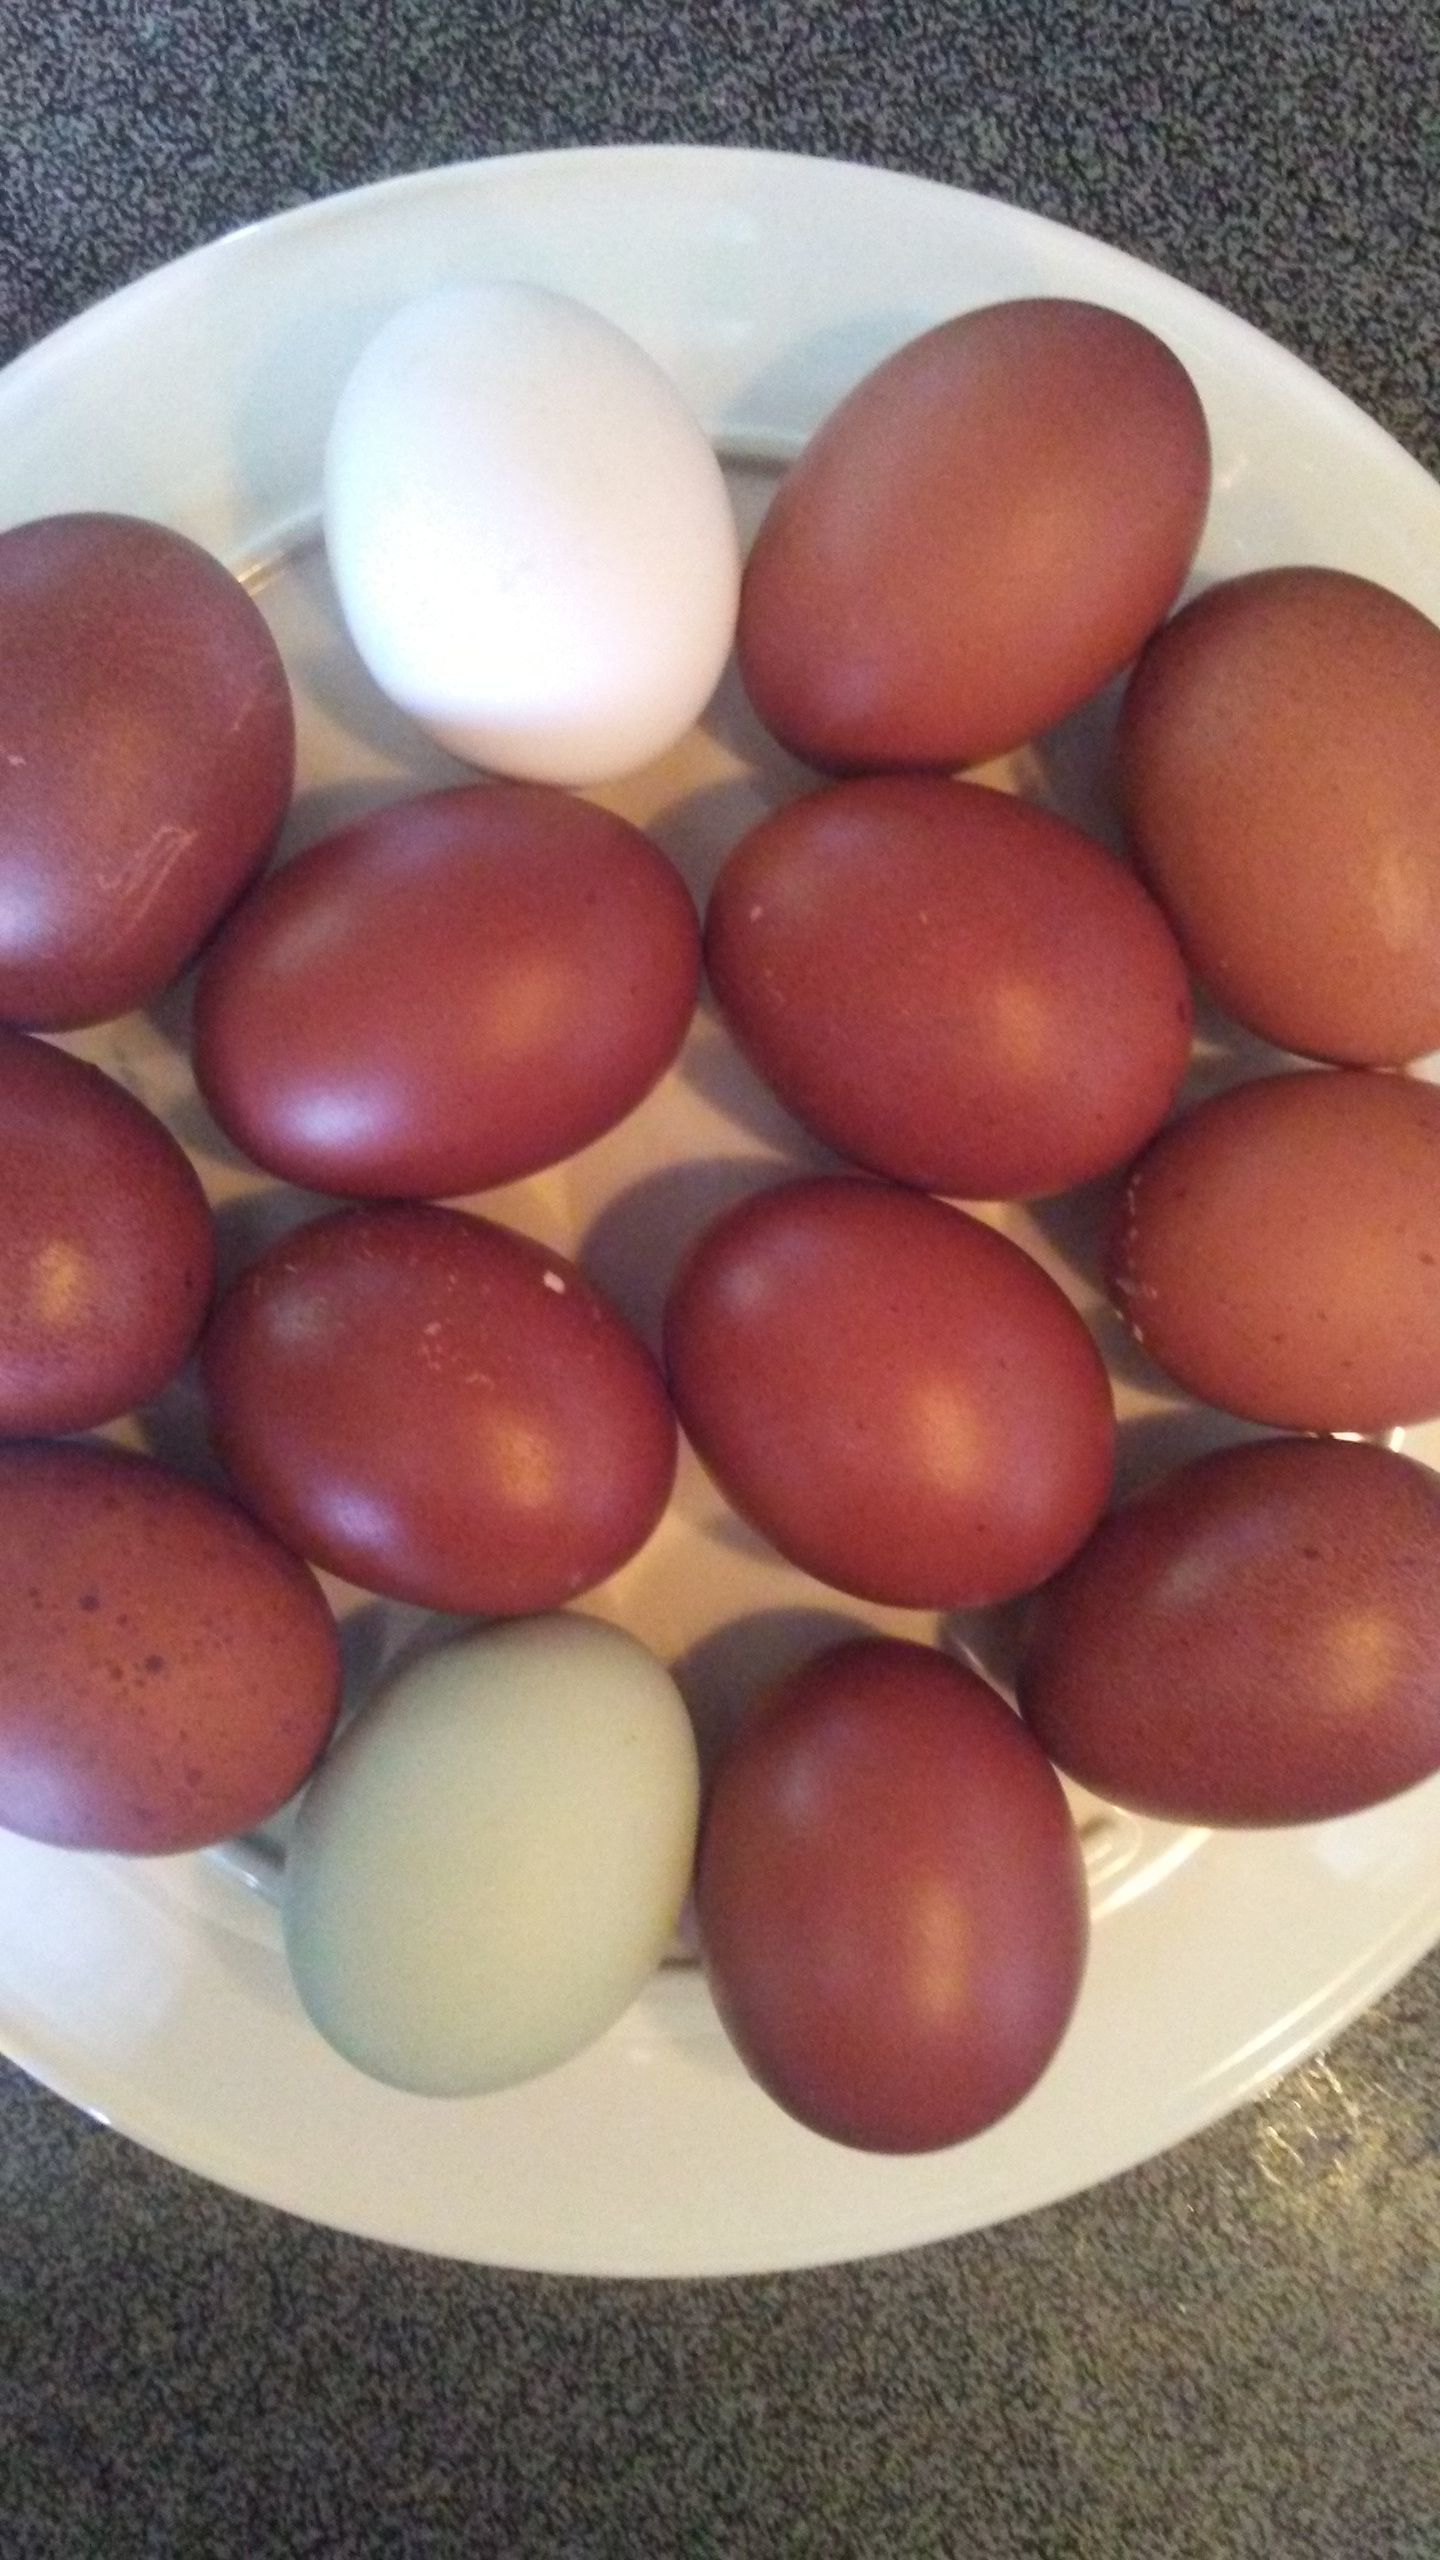 Copper Marans eggs just arrived!
Placed a storebought white egg and one
of my Easter Egger eggs for comparison.